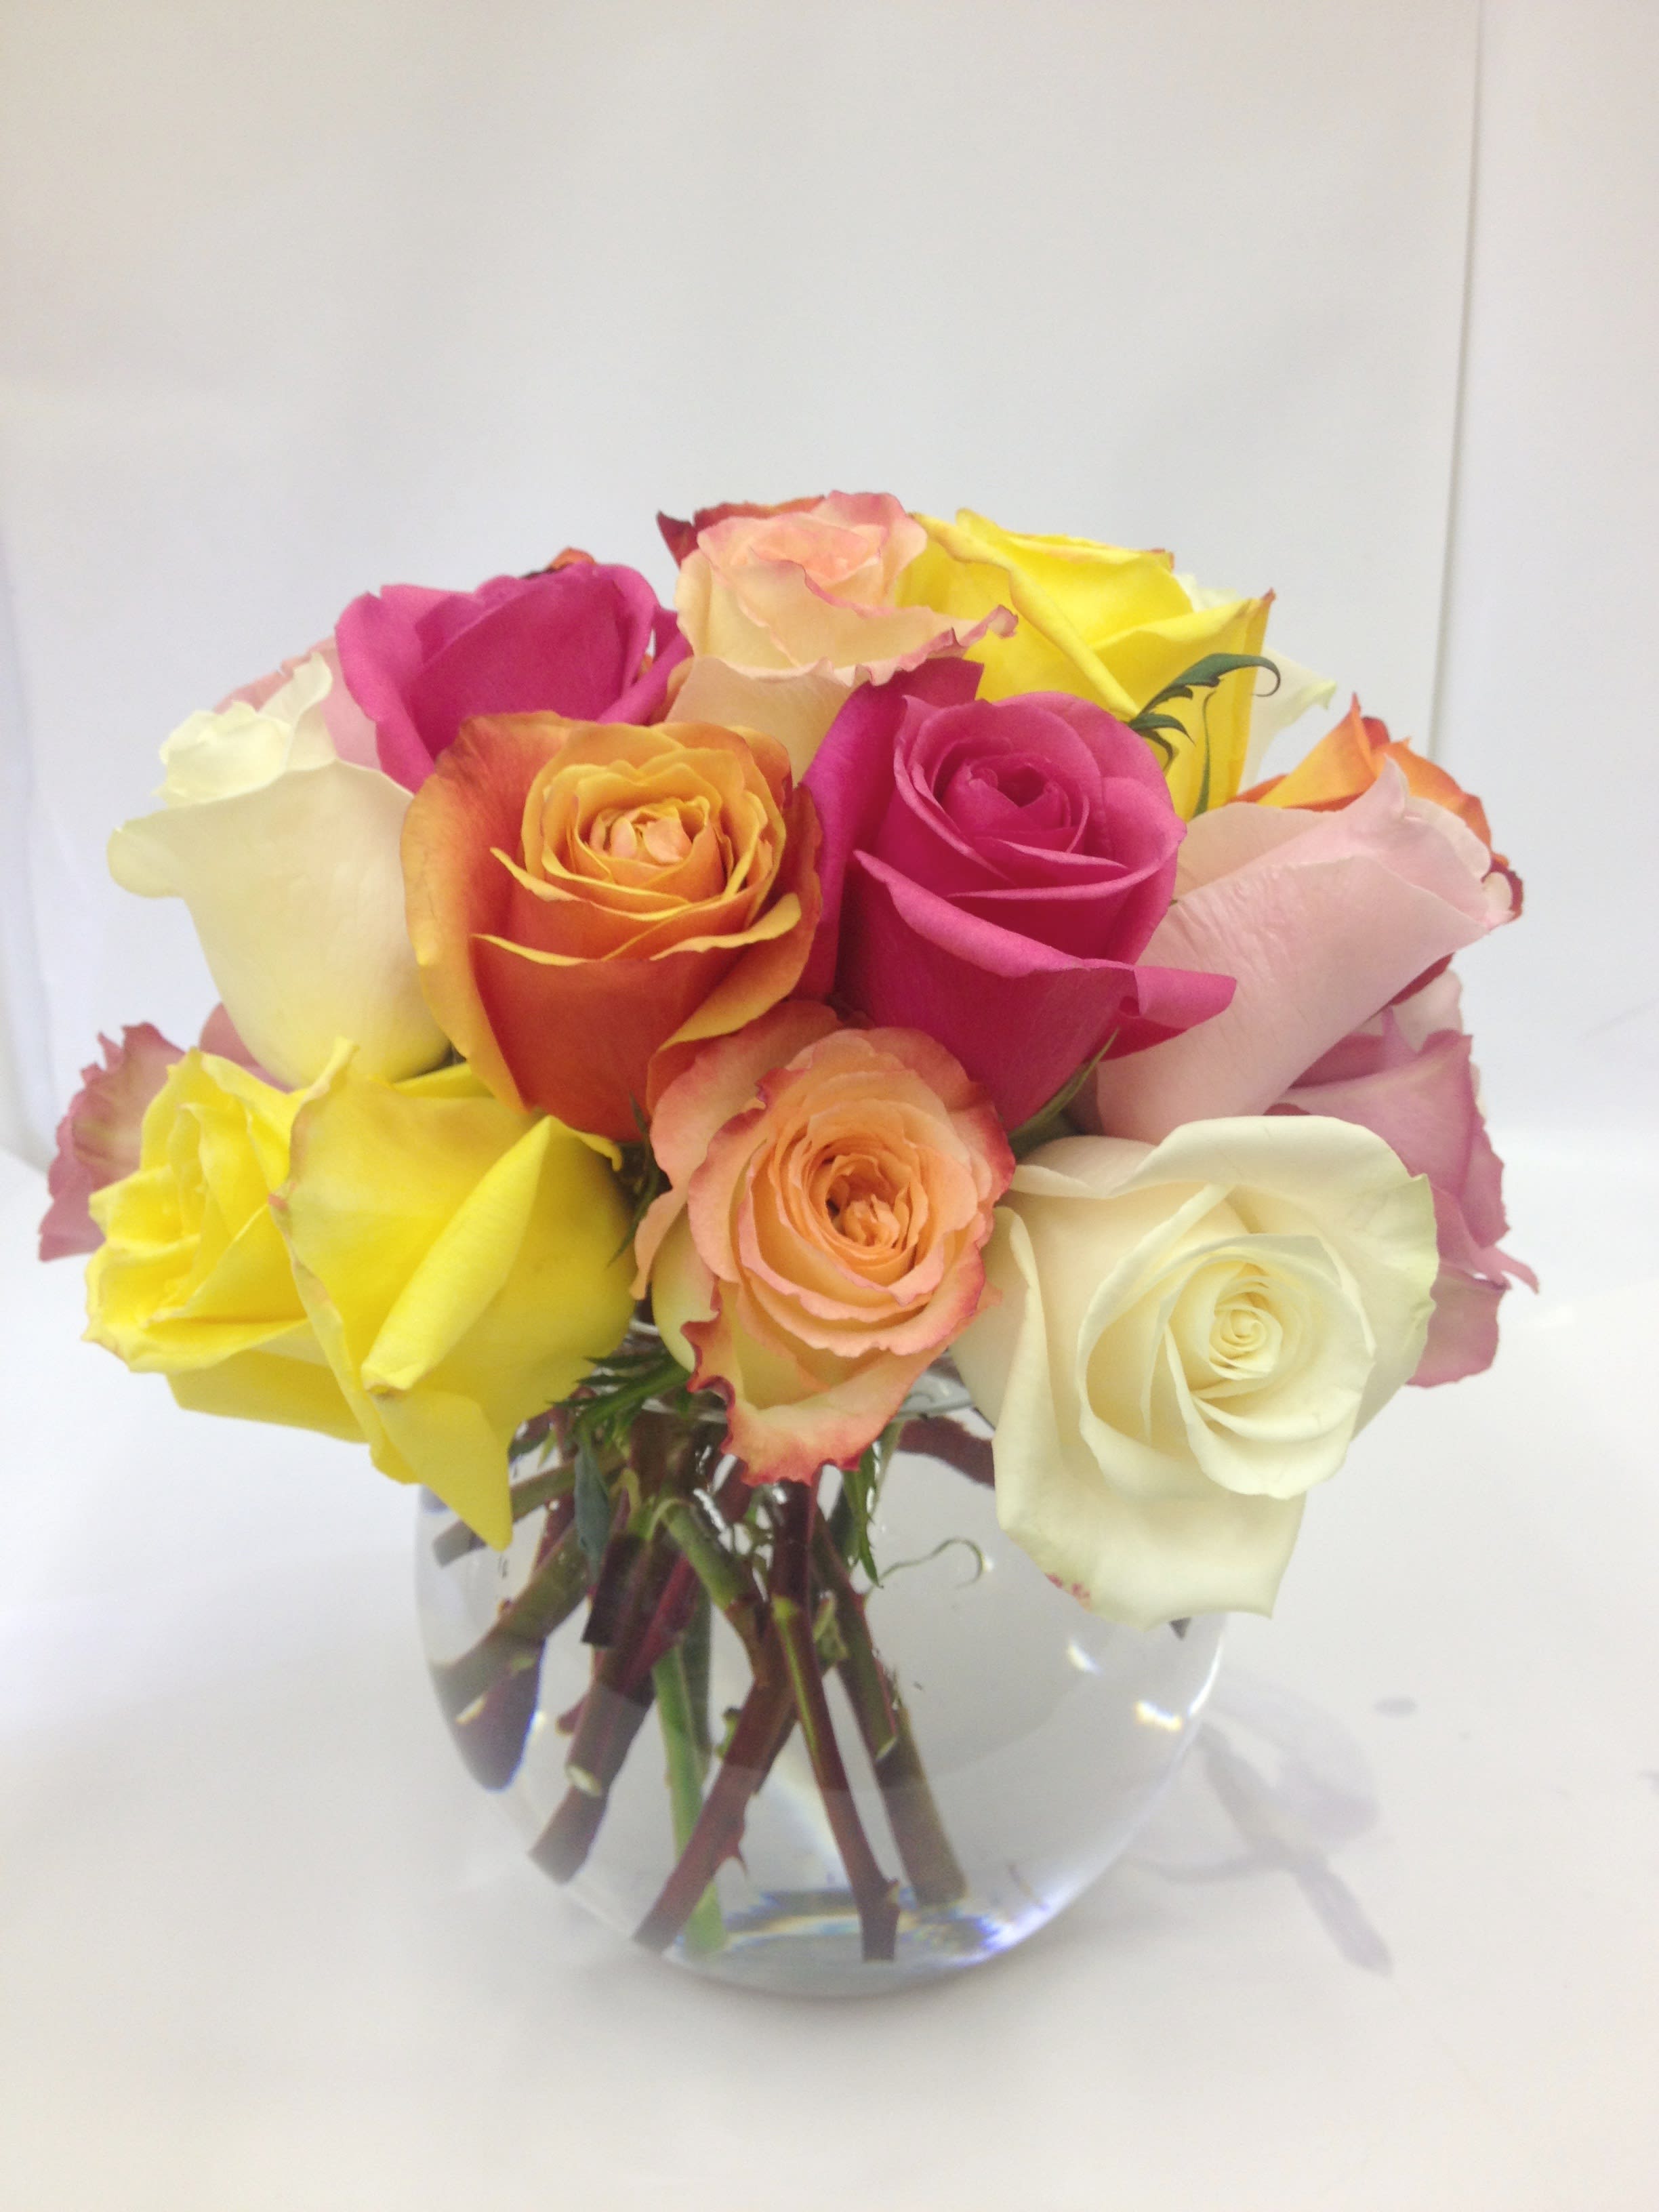  Rose Bowl Special - 18 beautiful roses in mixed  colors arranged in a clear glass bubble bowl or similar vase.  Approx. 10&quot;-12&quot; tall.  Deluxe includes 24 roses and Premium includes 36 roses. Due to product availability, container may vary.